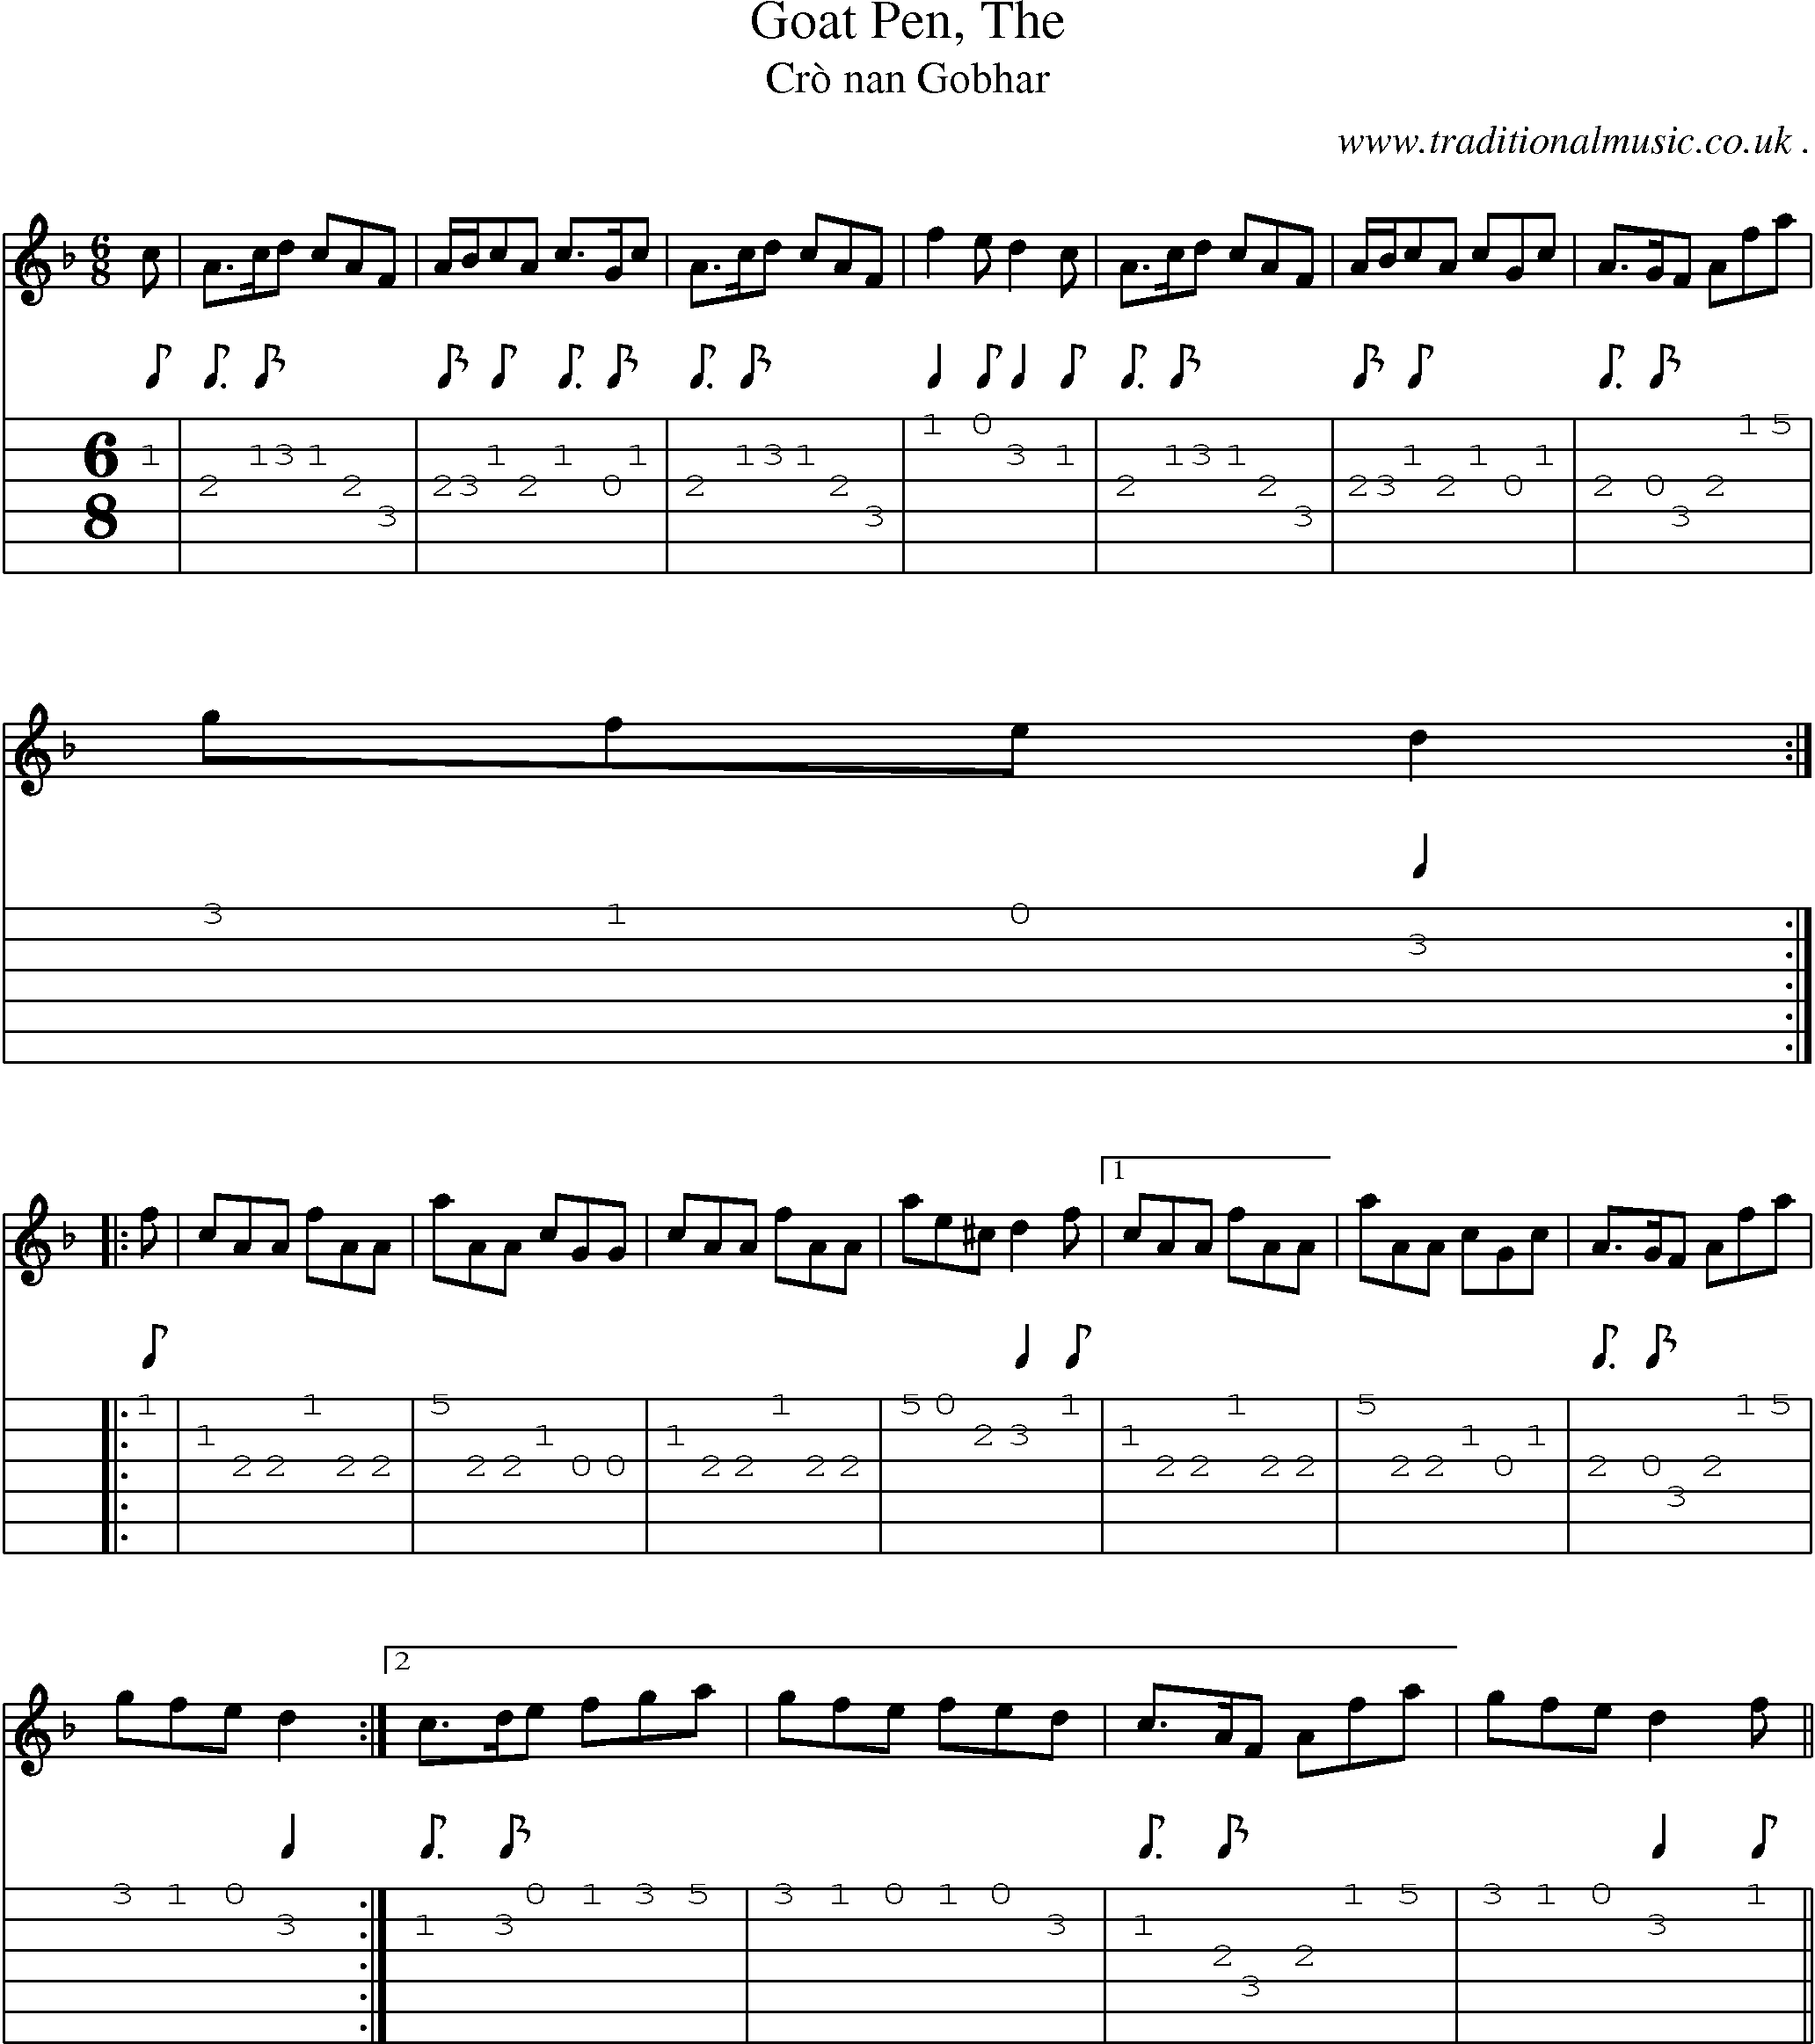 Sheet-music  score, Chords and Guitar Tabs for Goat Pen The